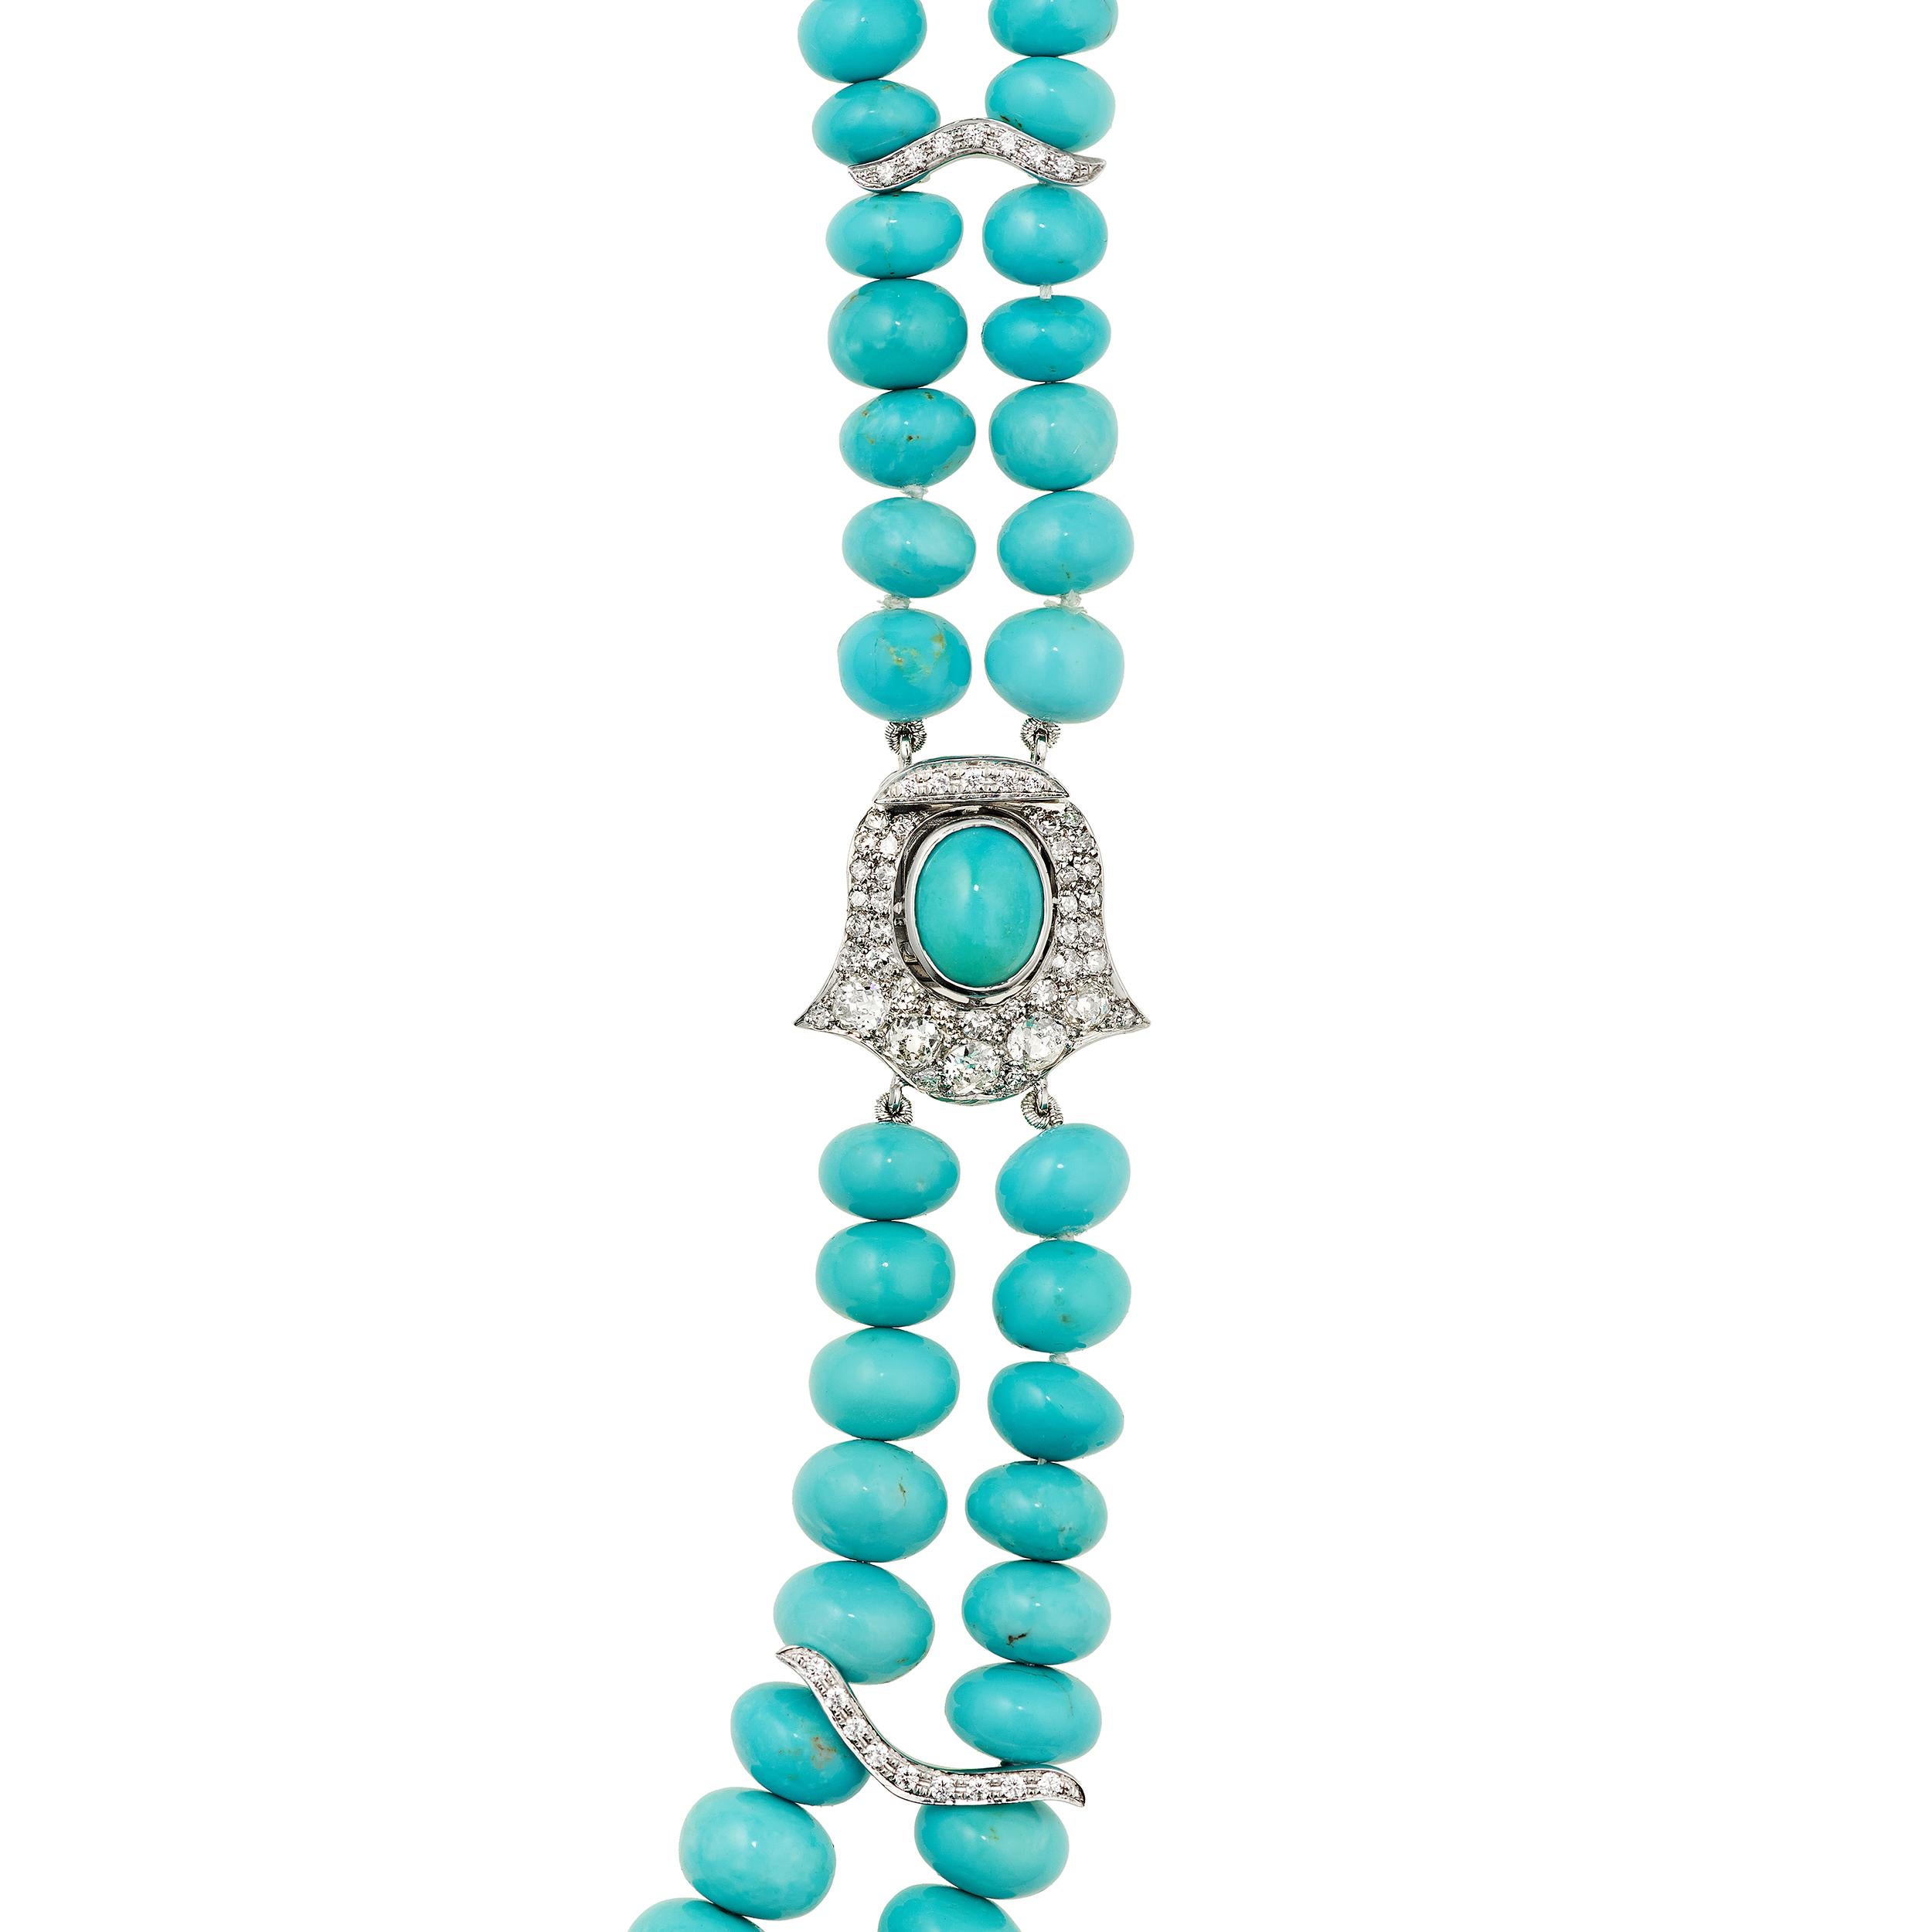 Ultra fine quality Sleeping Beauty Turquoise Rondelles ranging from 6.5 - 12.5 mm in a graduated double strand necklace.  The focal point on the side of the necklace is also the clasp, which is a vintage treasure renewed for modern wear.  The 4